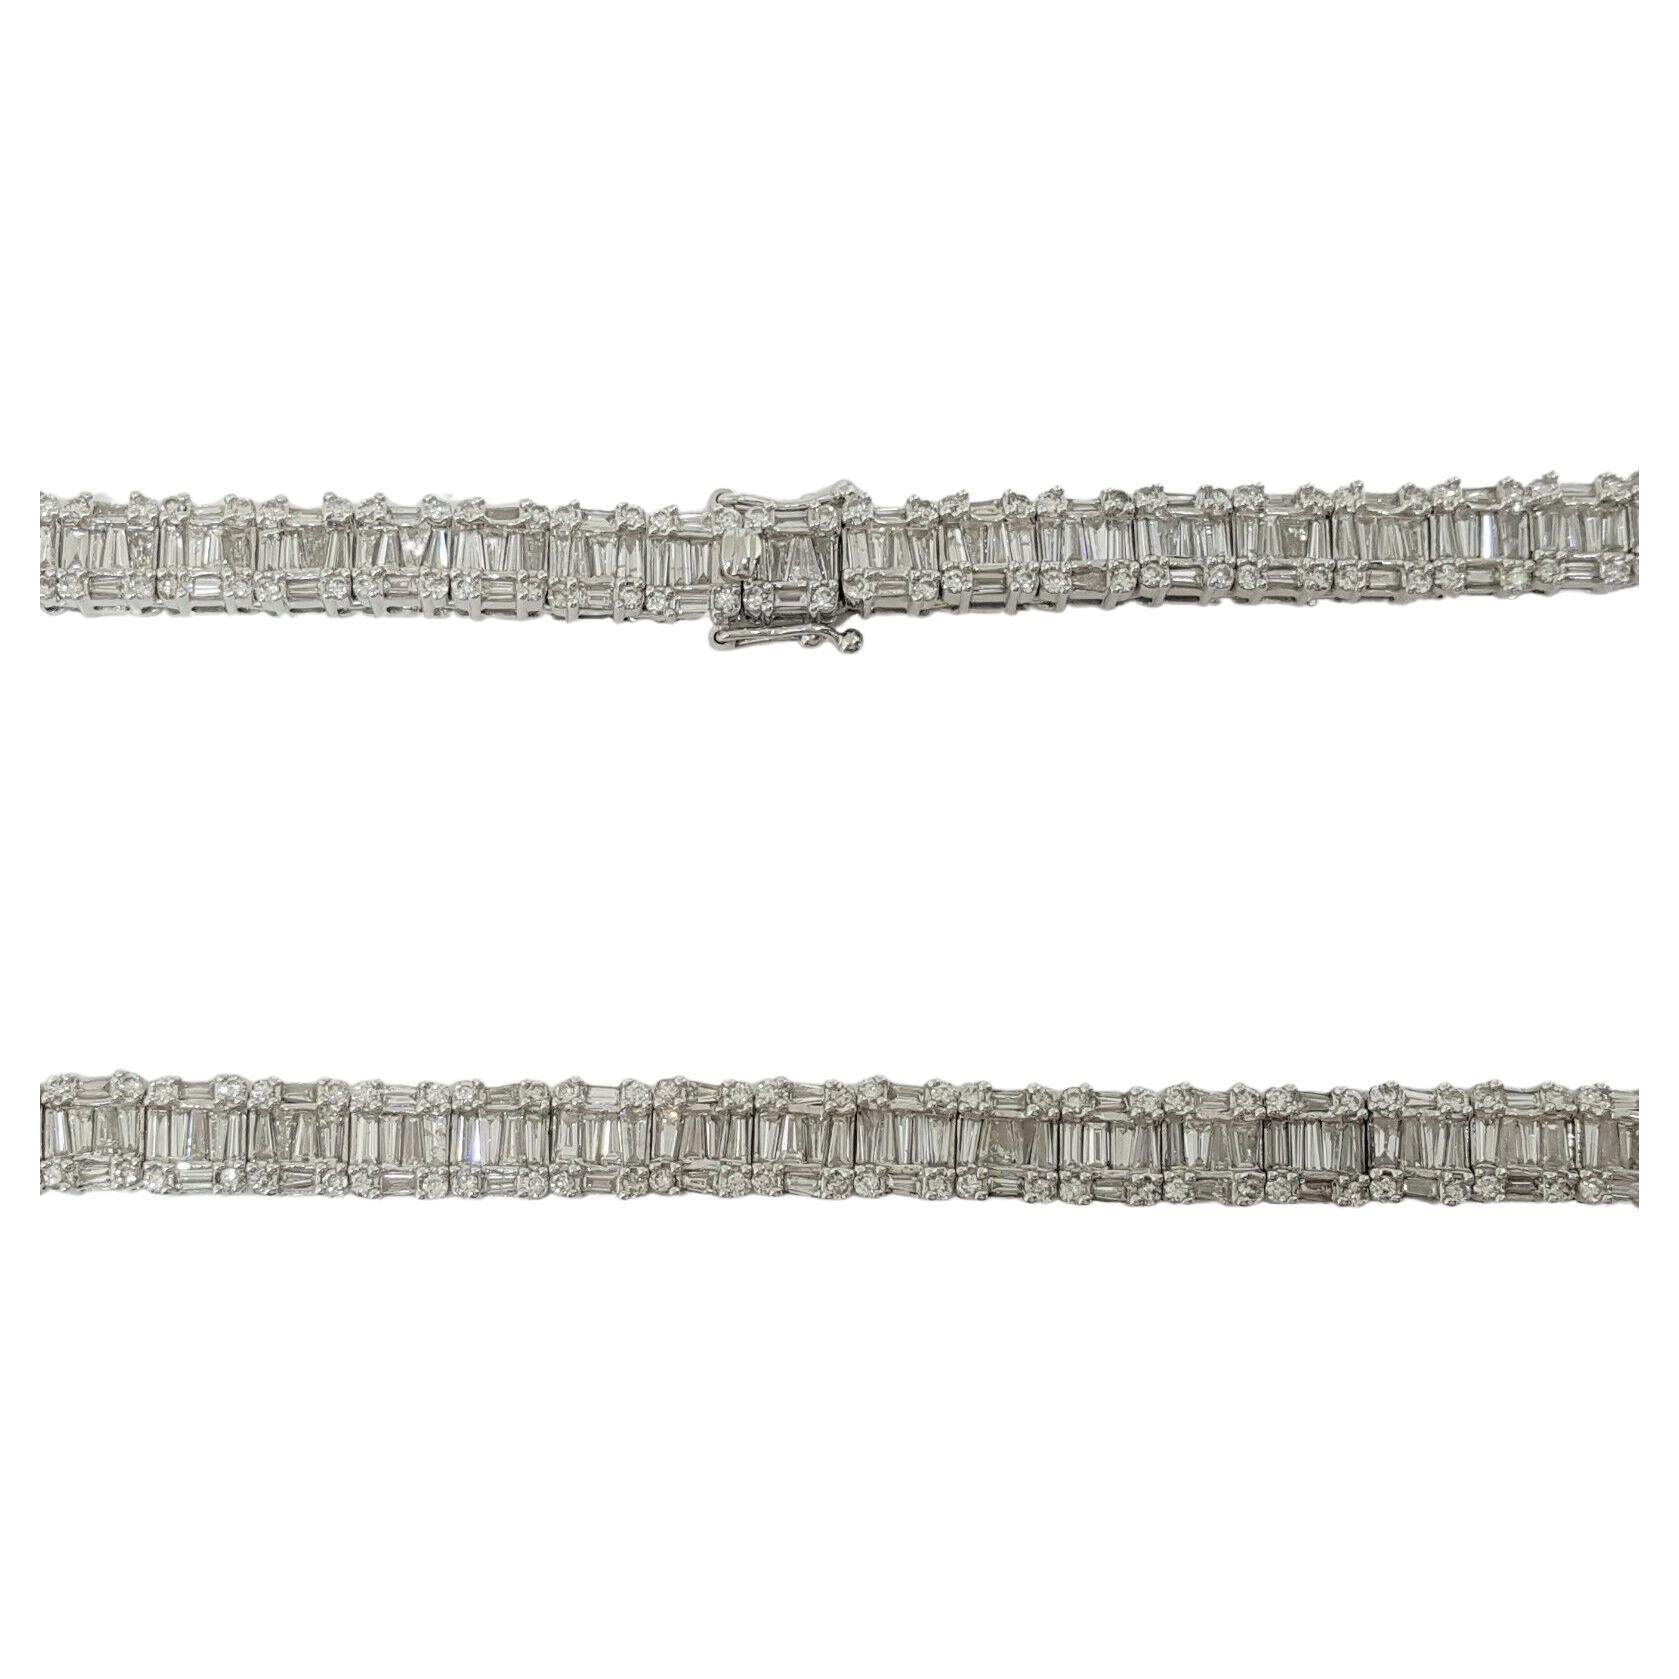 White Gold Unisex 20.52 ct Total Weight Round Brilliant & Baguette Cut Diamonds Necklace. 

17 inches long

Consider that for this quality and handmandcraft this jewel will cost much more in the market.